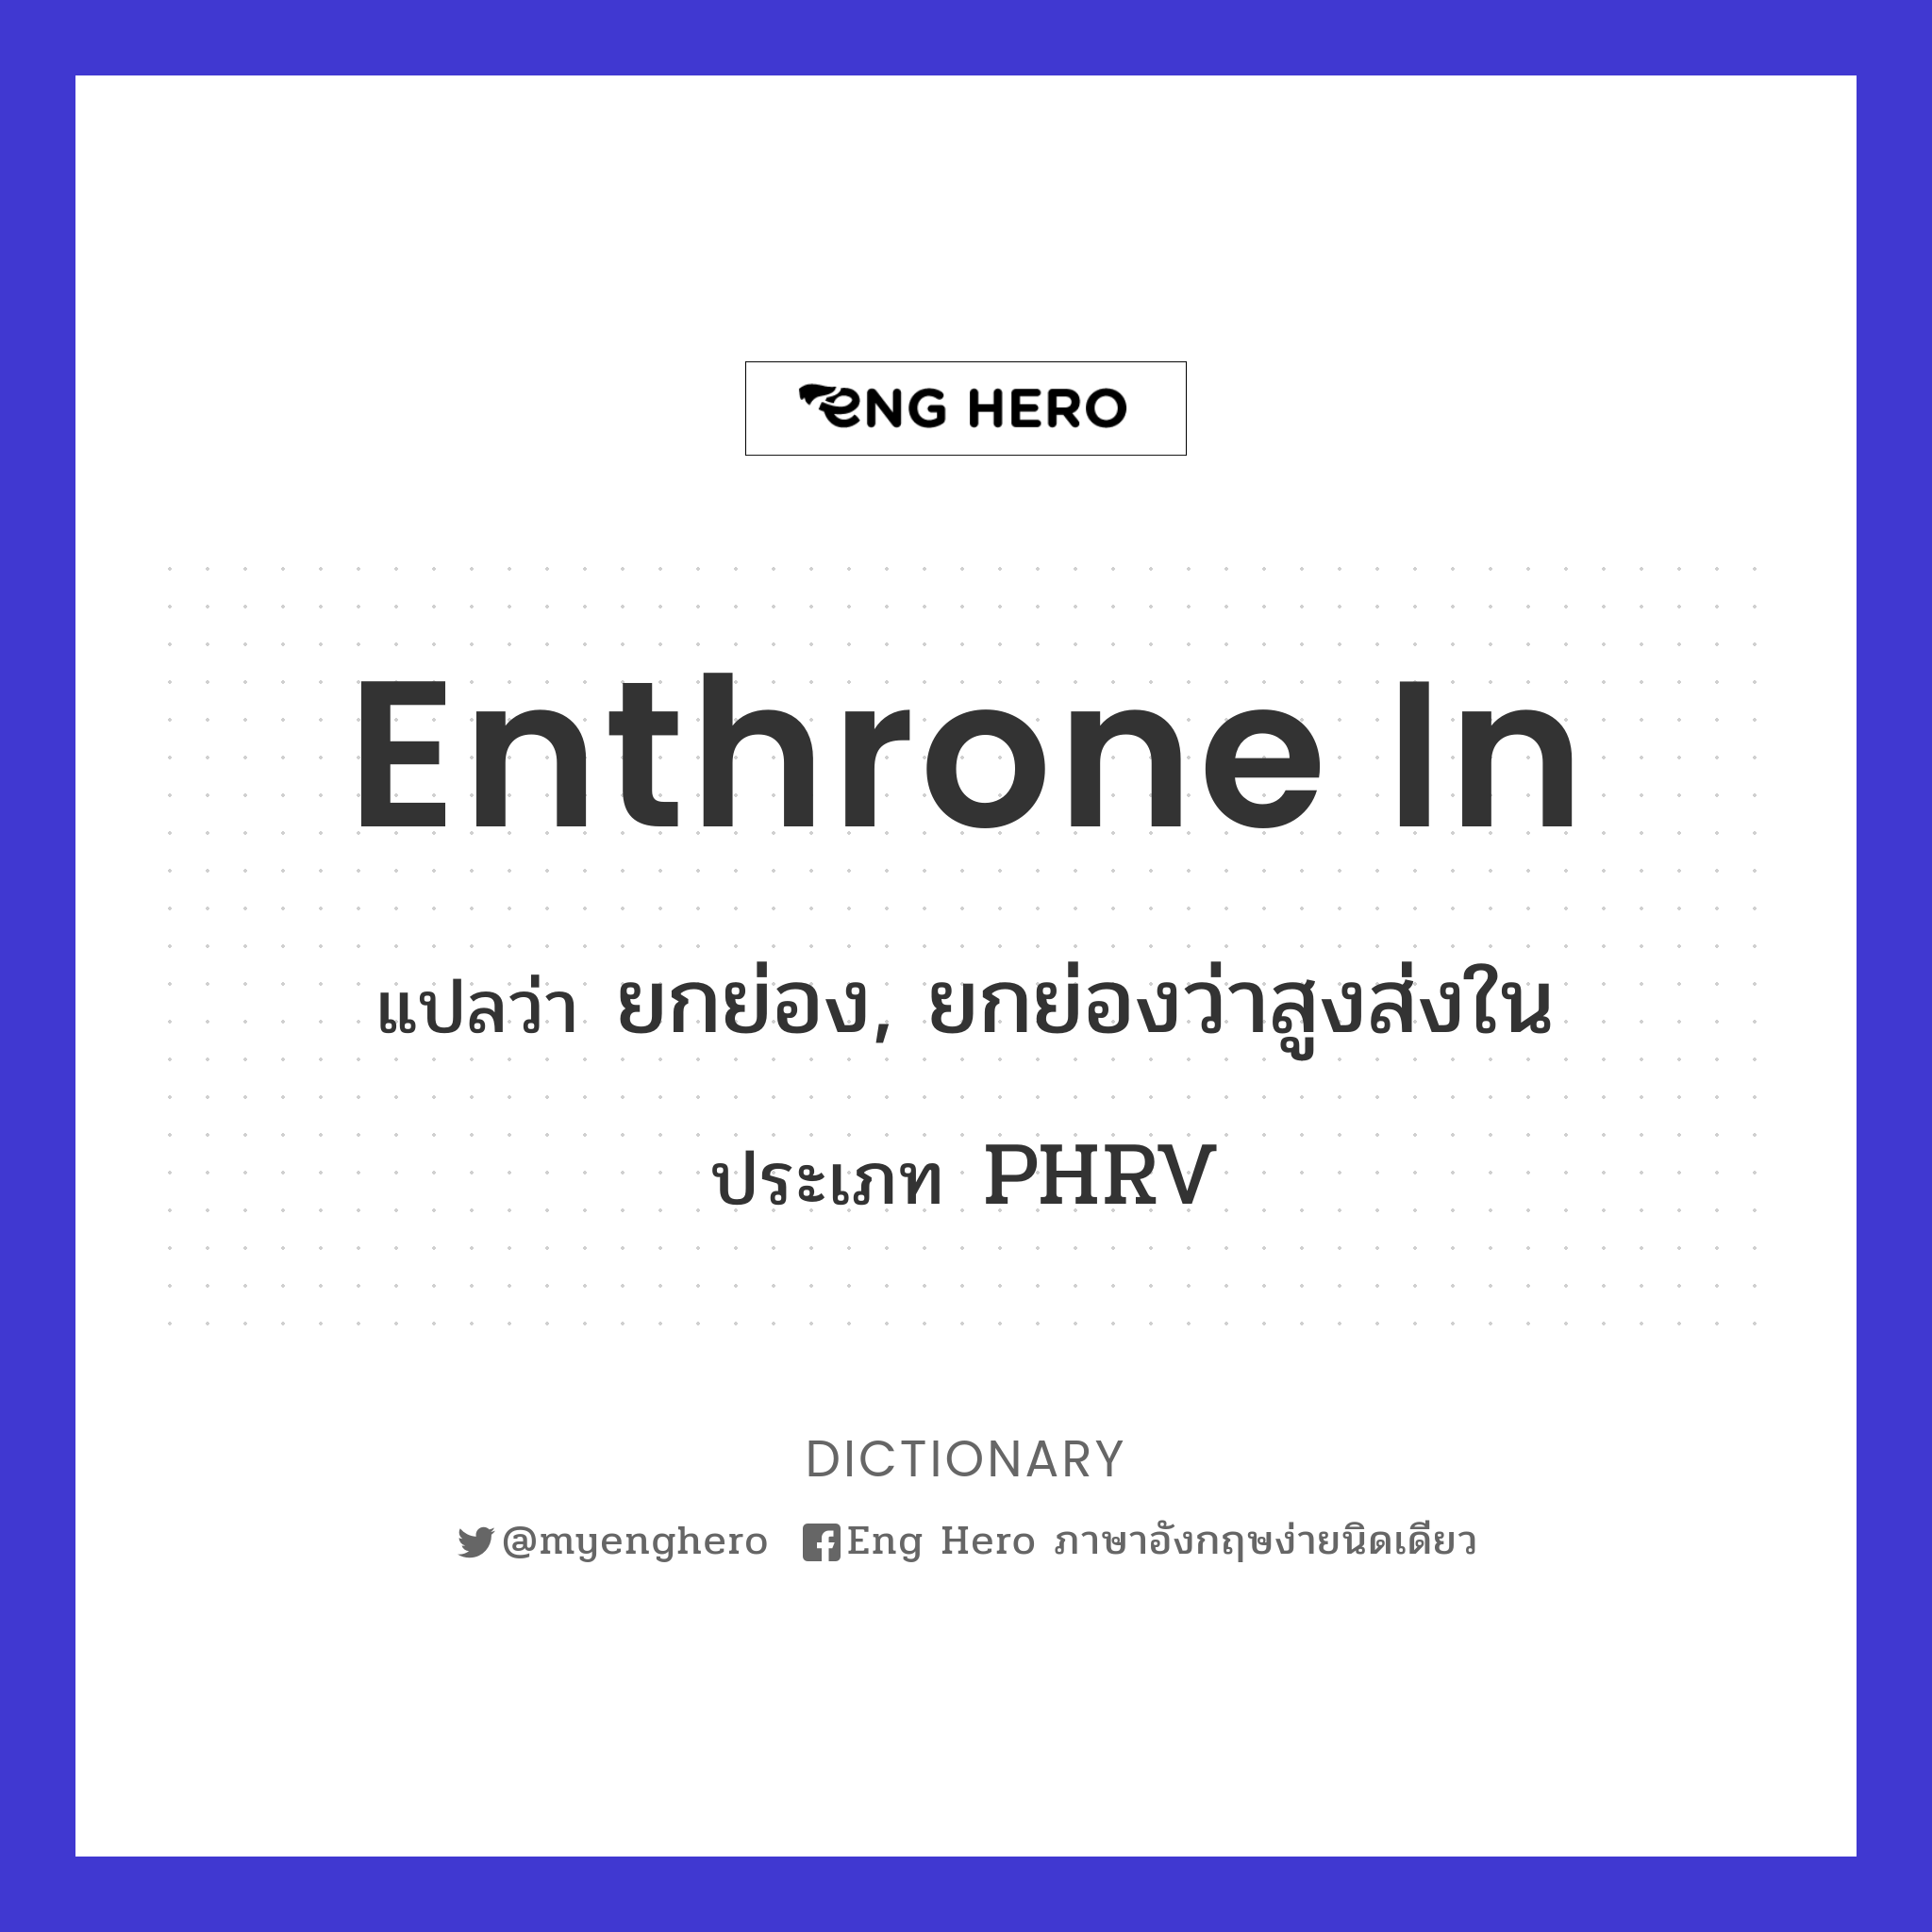 enthrone in